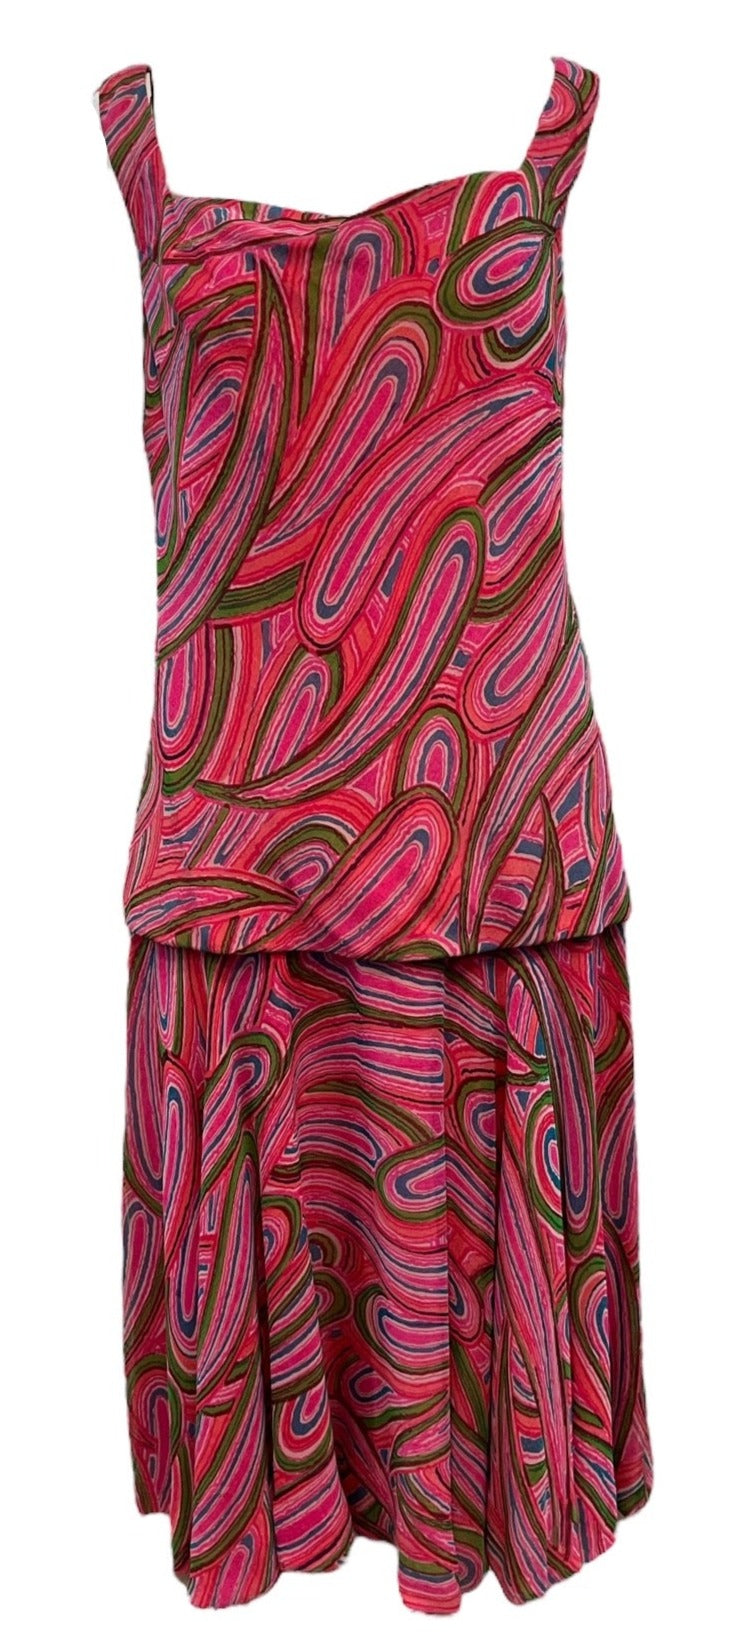 Joan Leslie 60s Mod Psychedelic Chiffon Party Dress FRONT 1 of 7